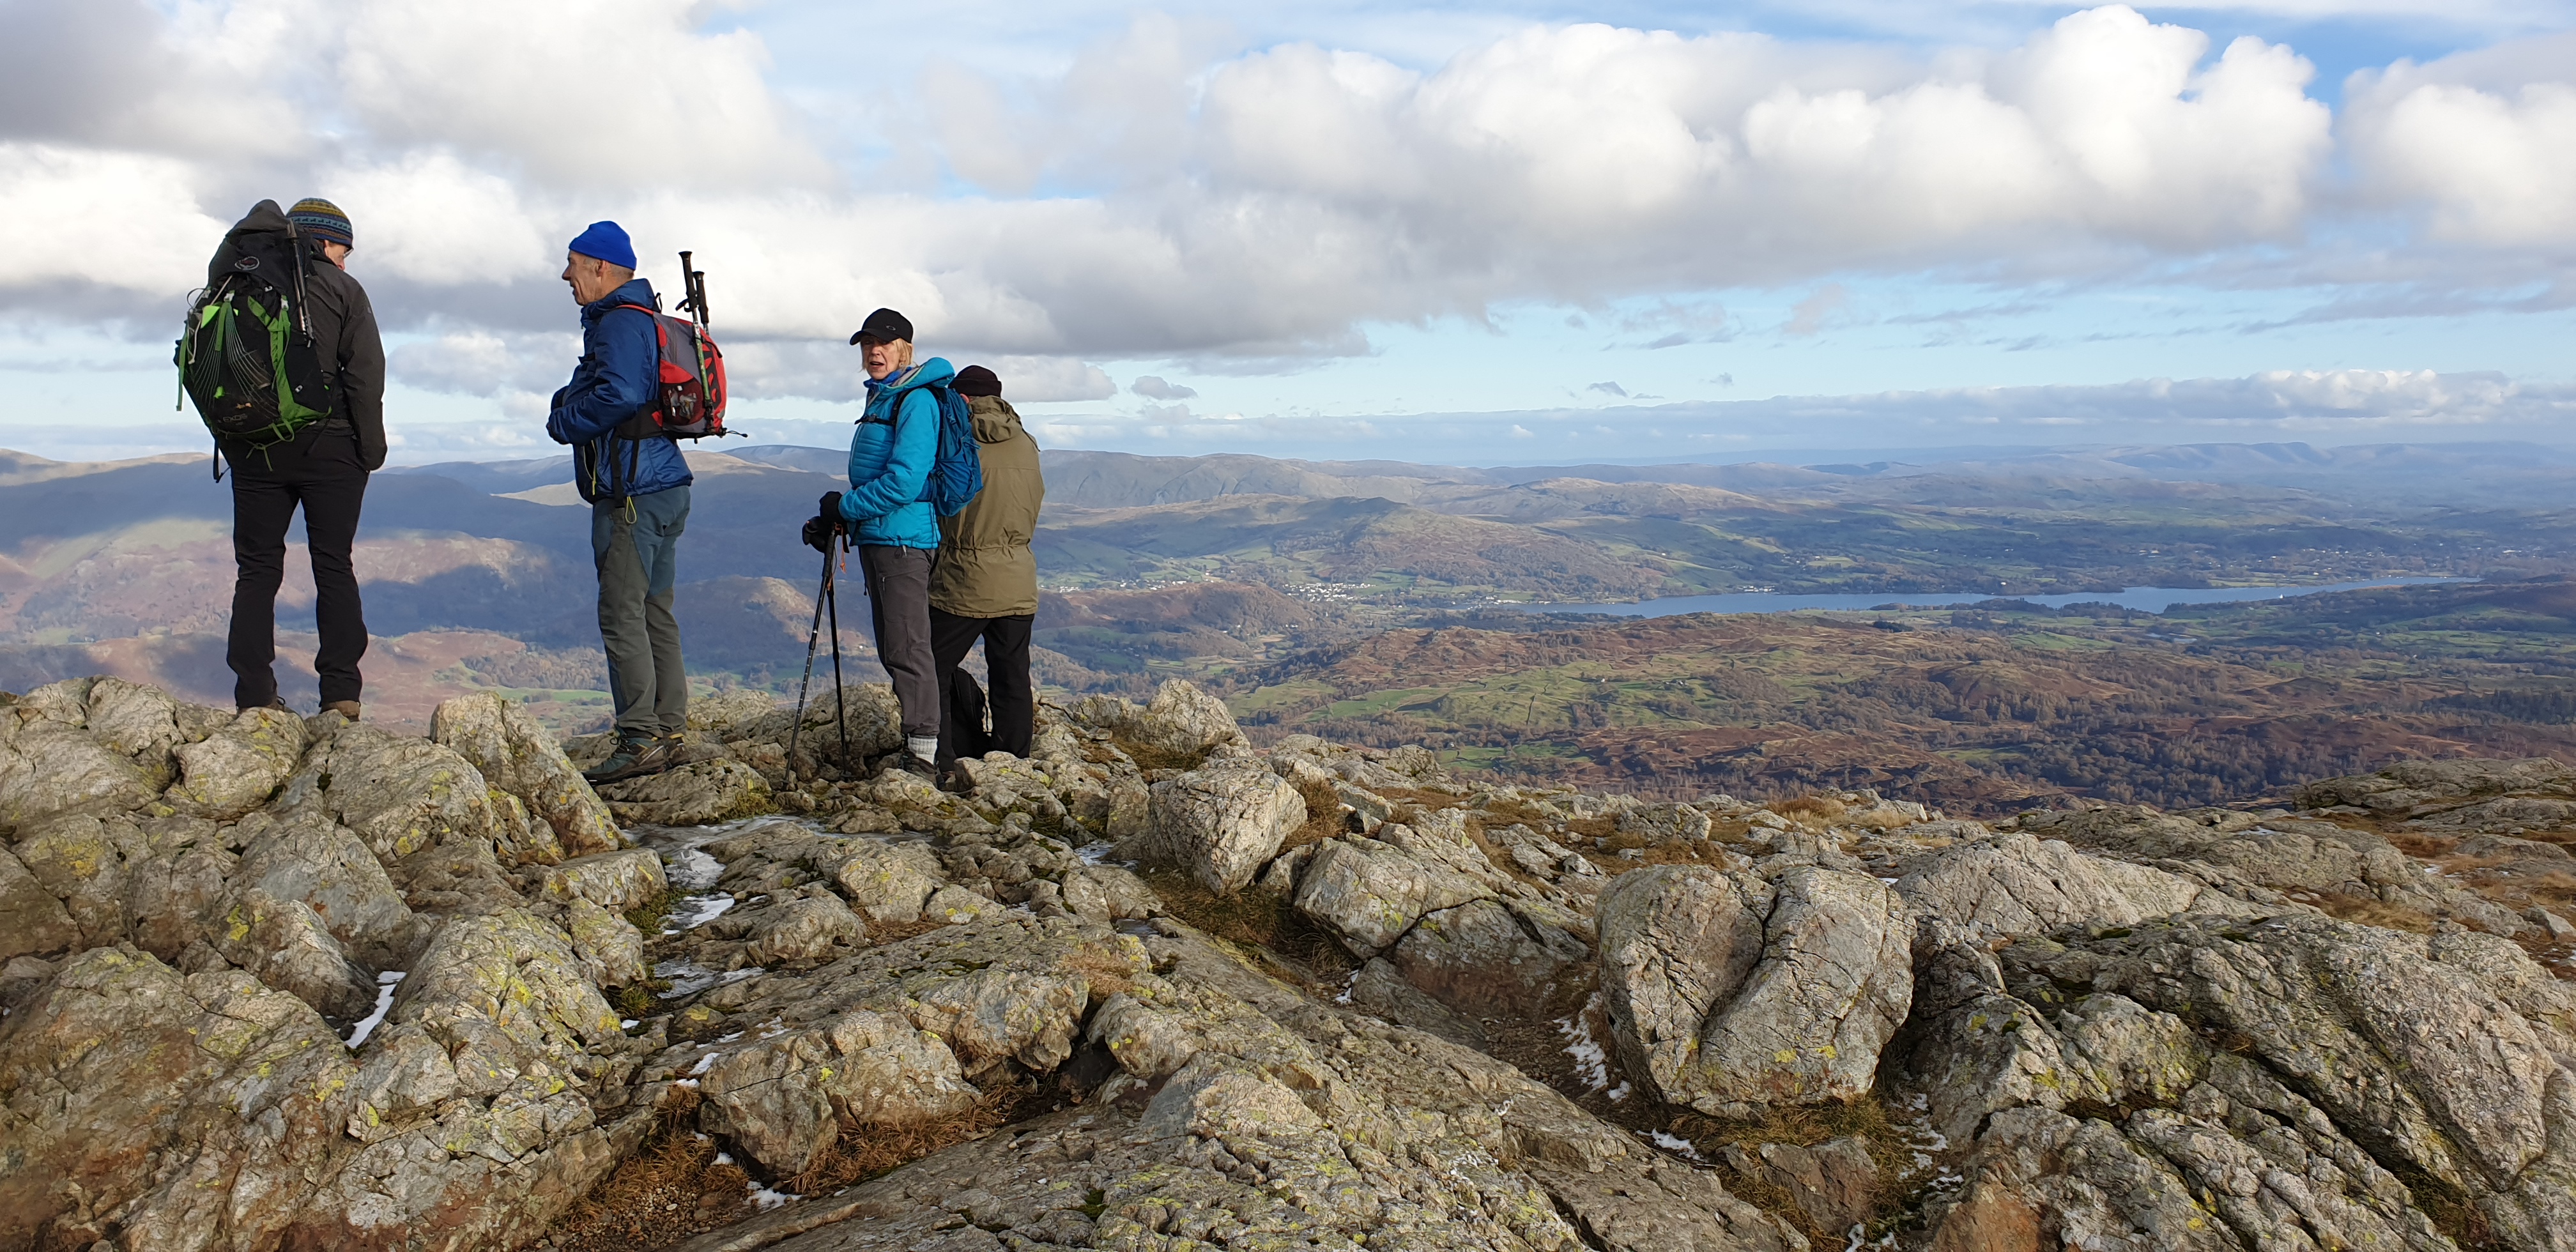 A Great Day out on Wetherlam